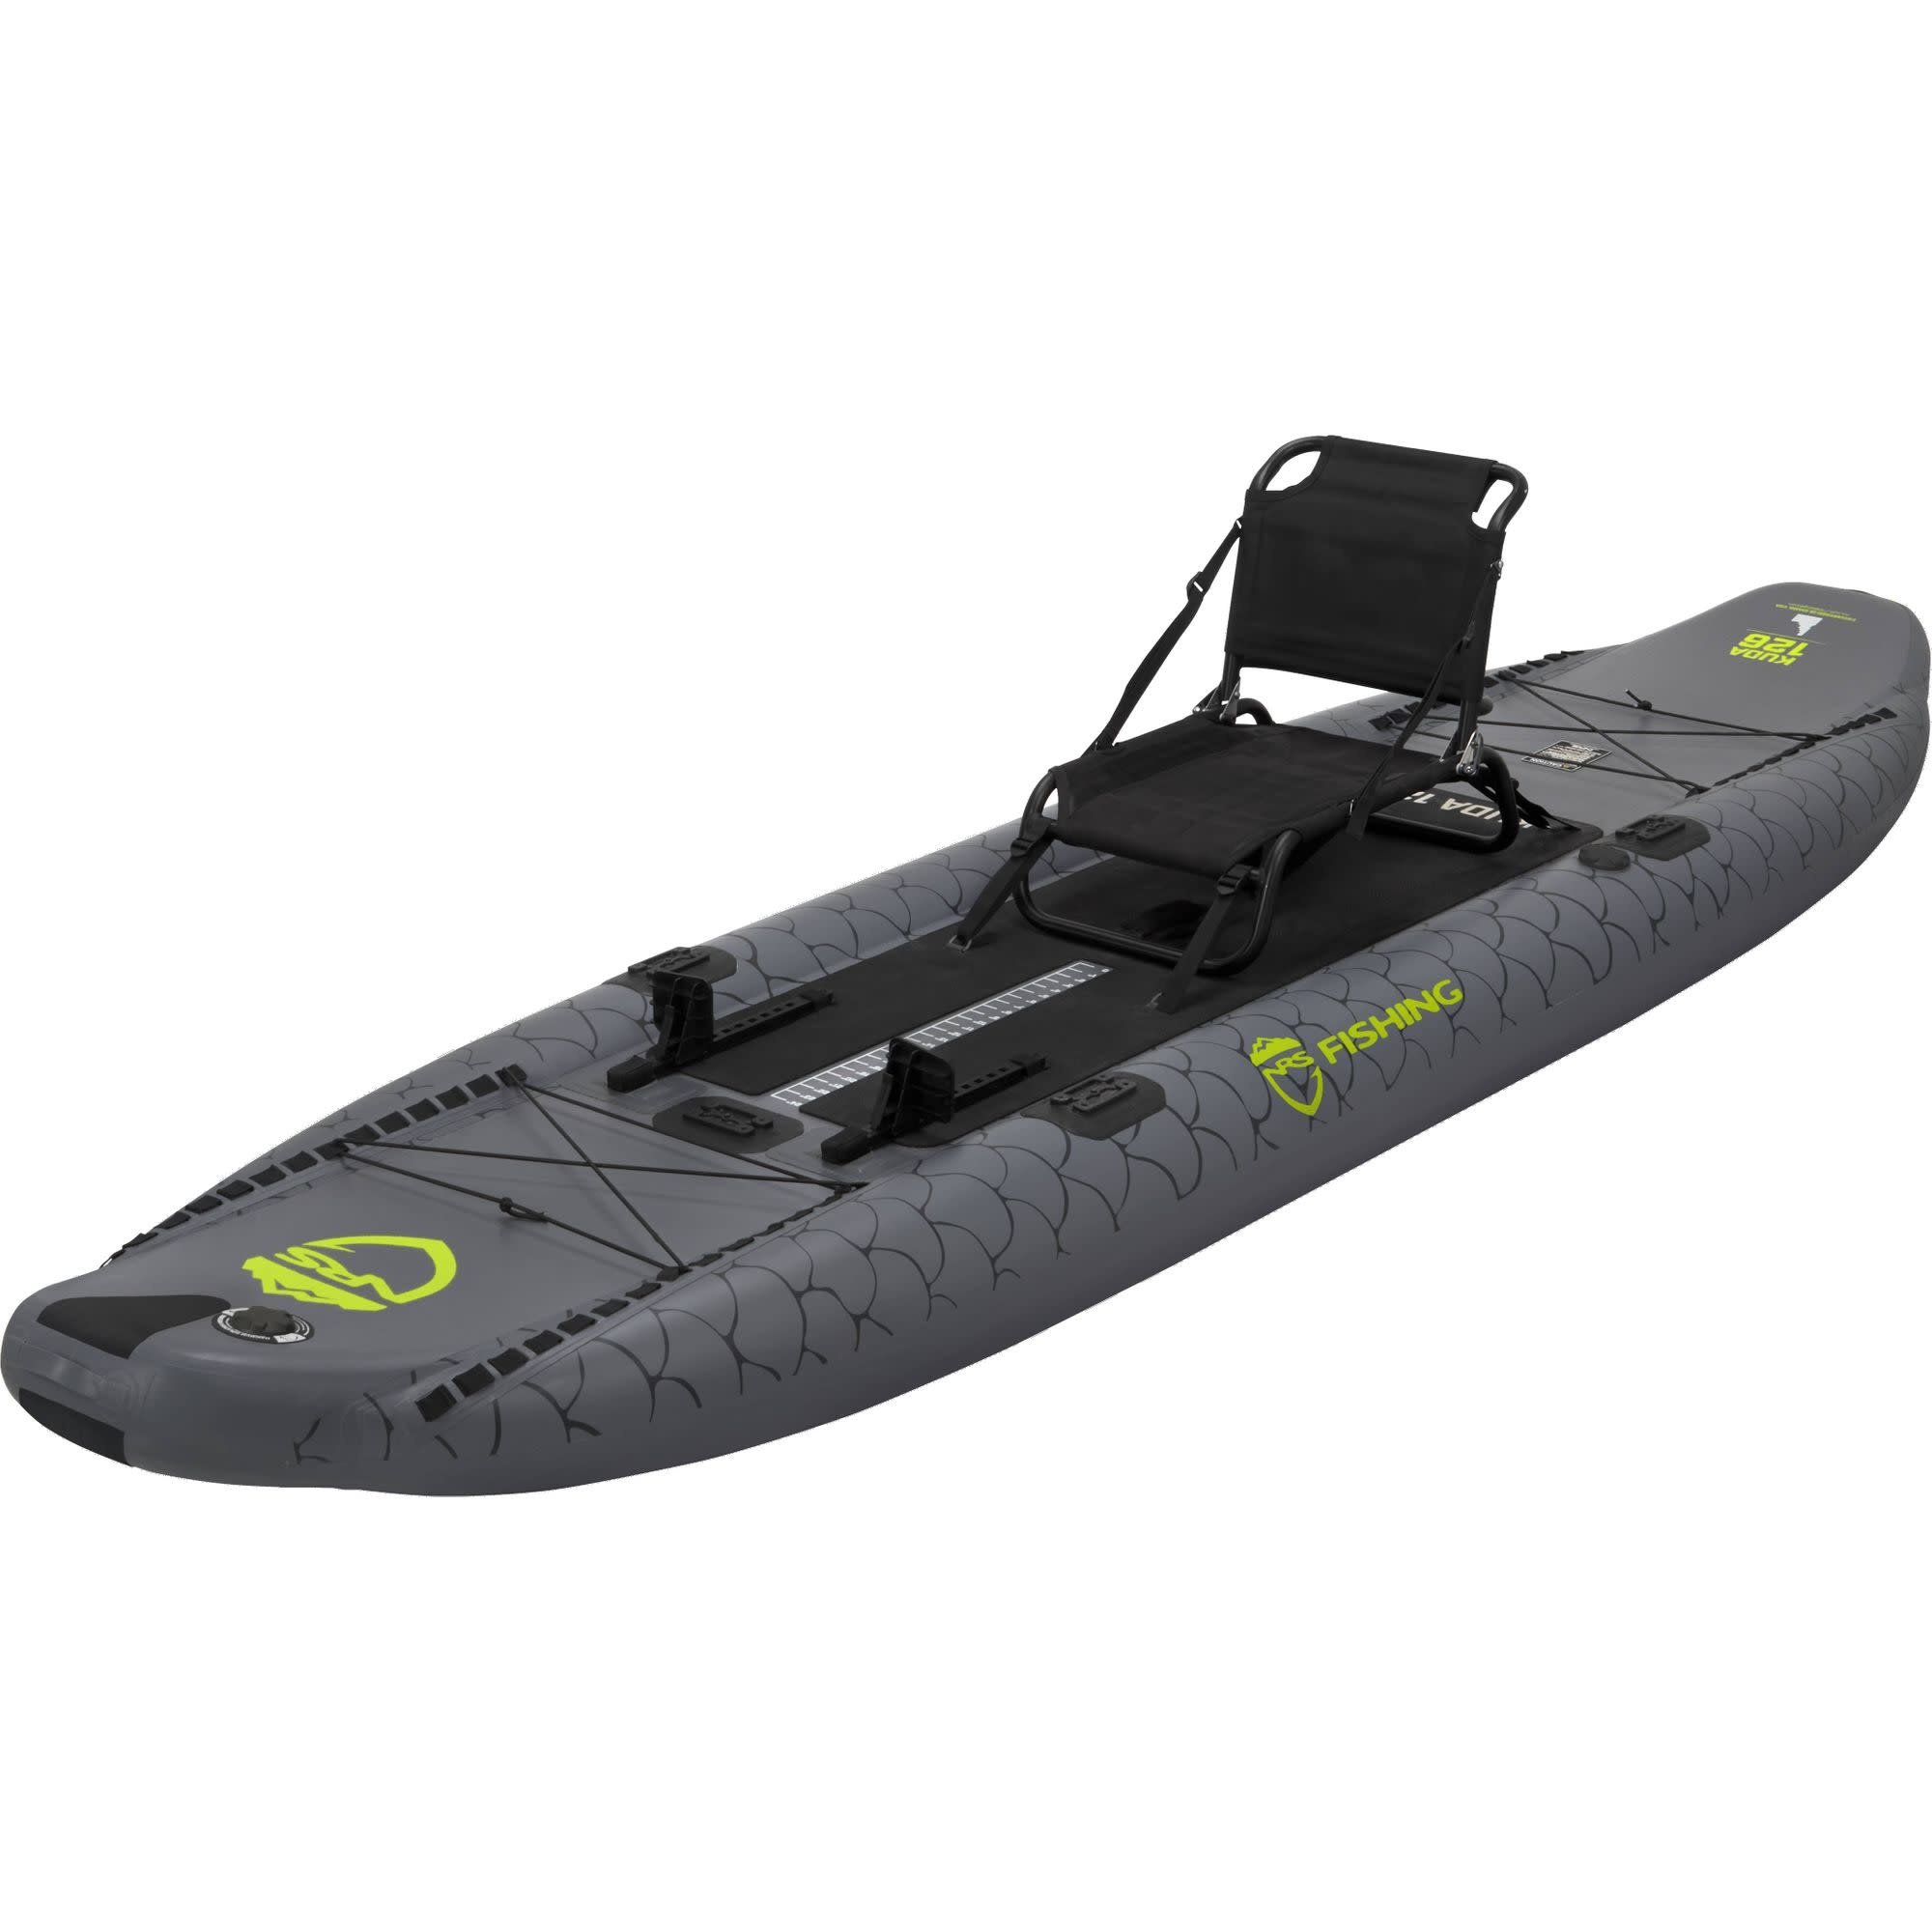 NRS Kuda Inflatable Sit-On-Top Kayak Gray, 12ft 6in